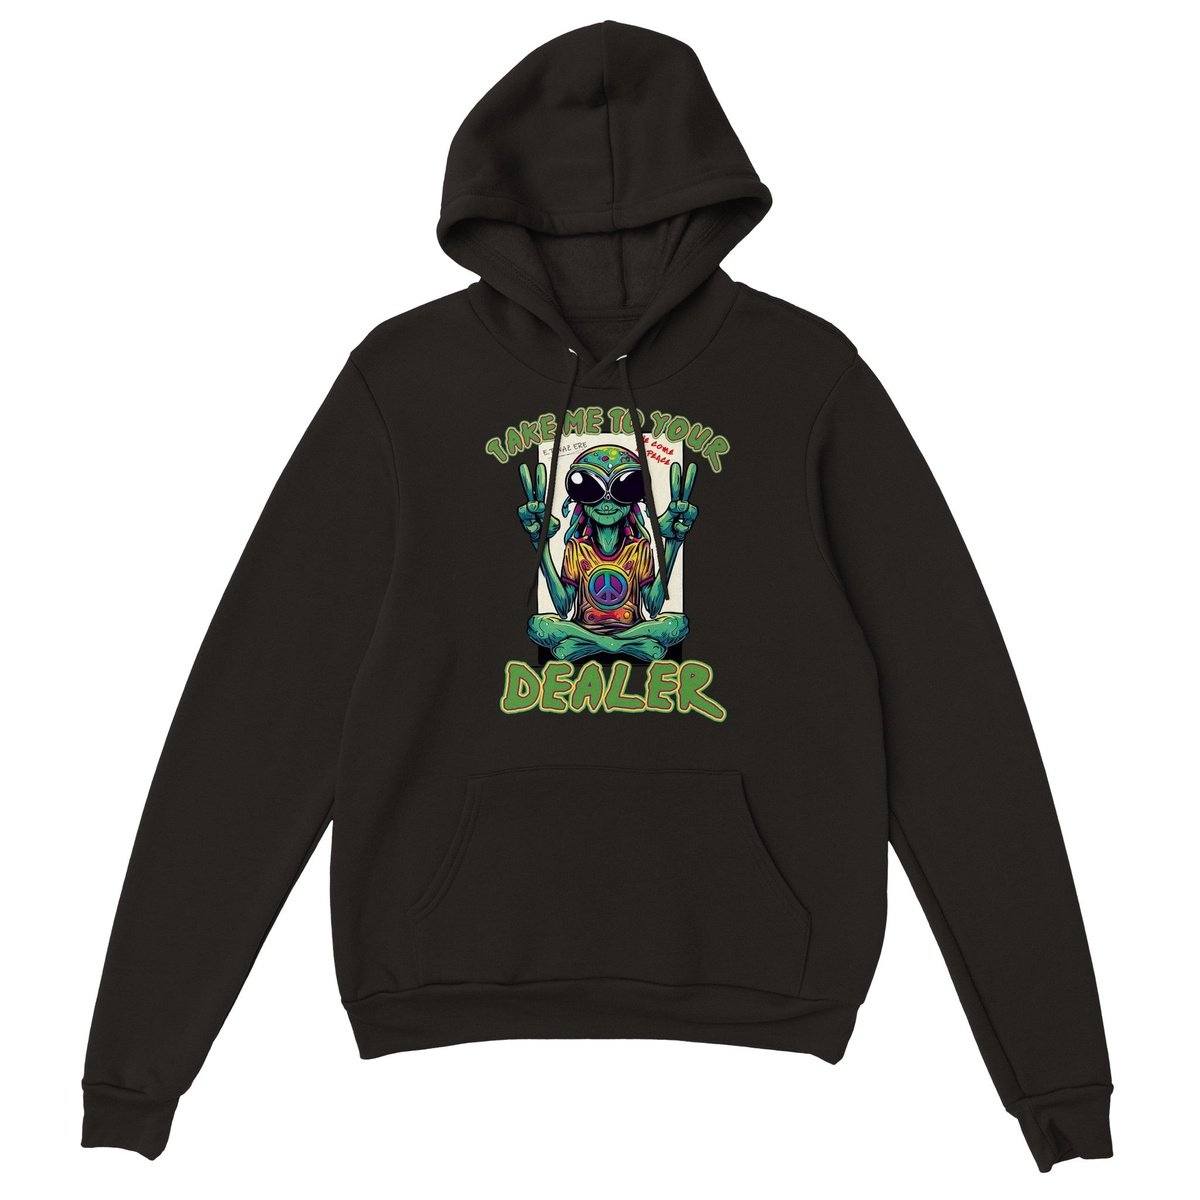 Take Me To Your Dealer Hoodie Australia Online Color Black / XS